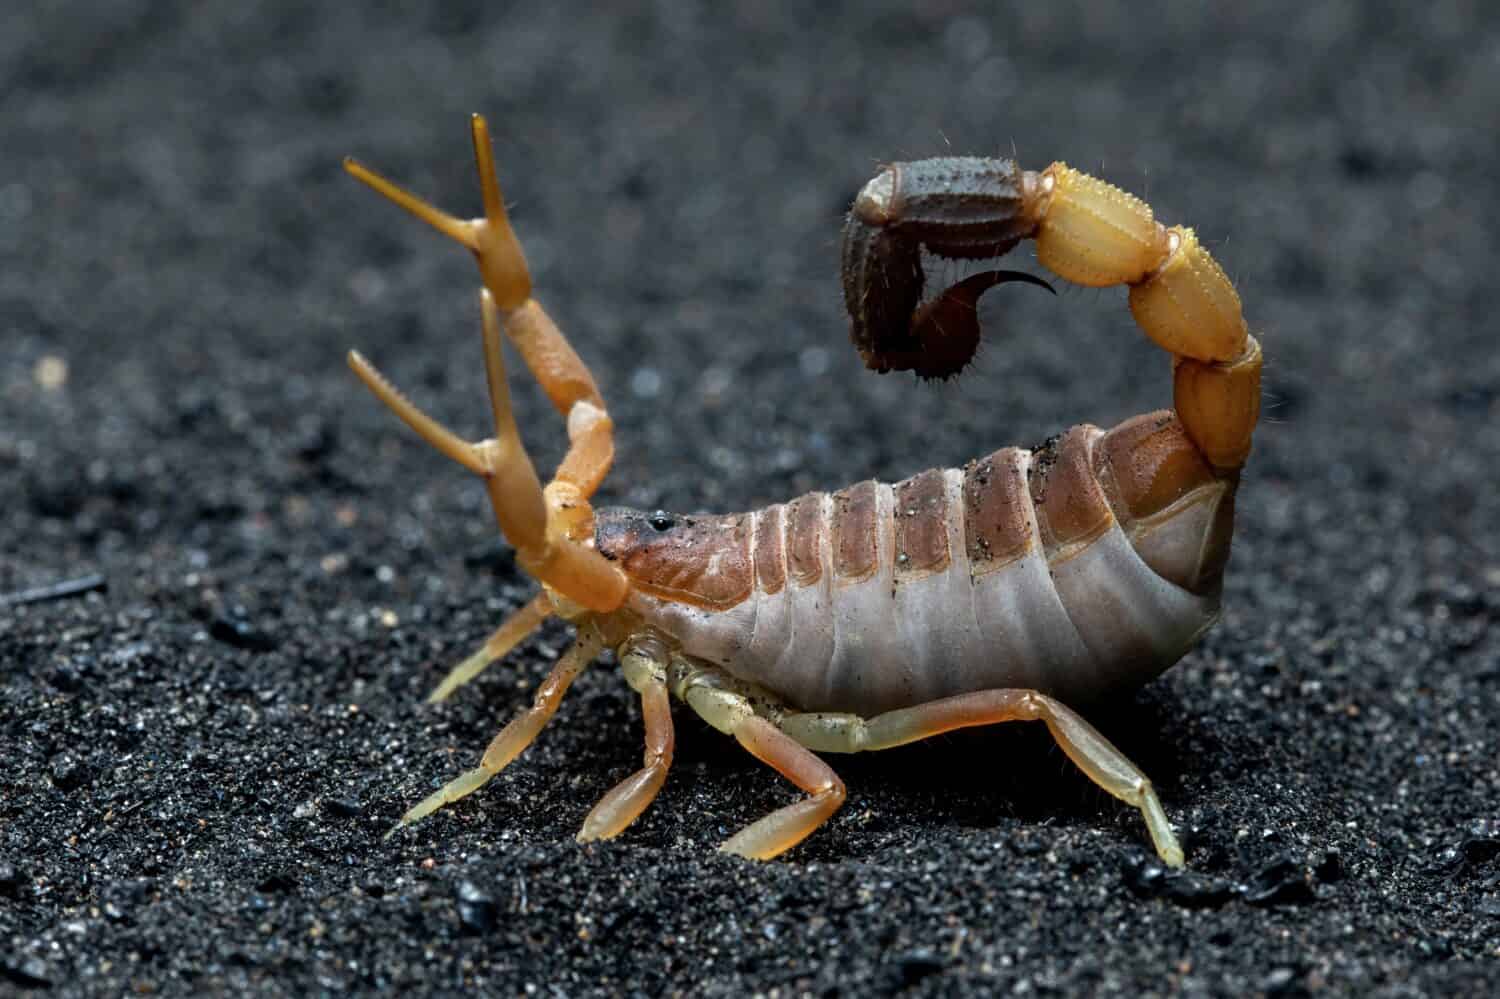 Parabuthus maximus commonly known as the Thick-tailed Scorpion.